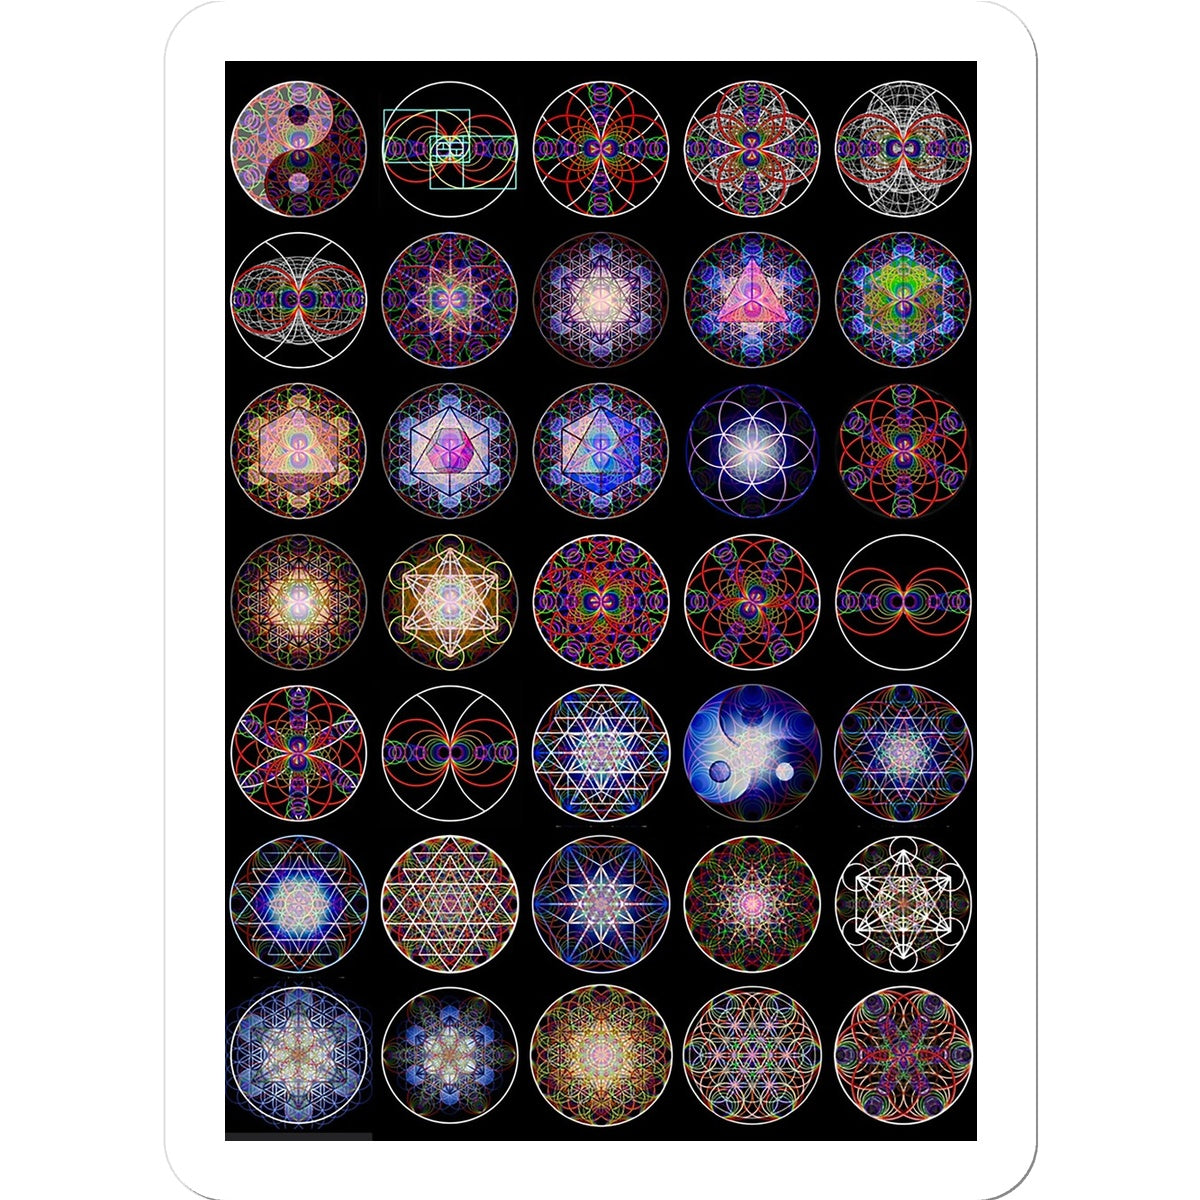 35 Sound Waves Including The Platonic Solids Sticker